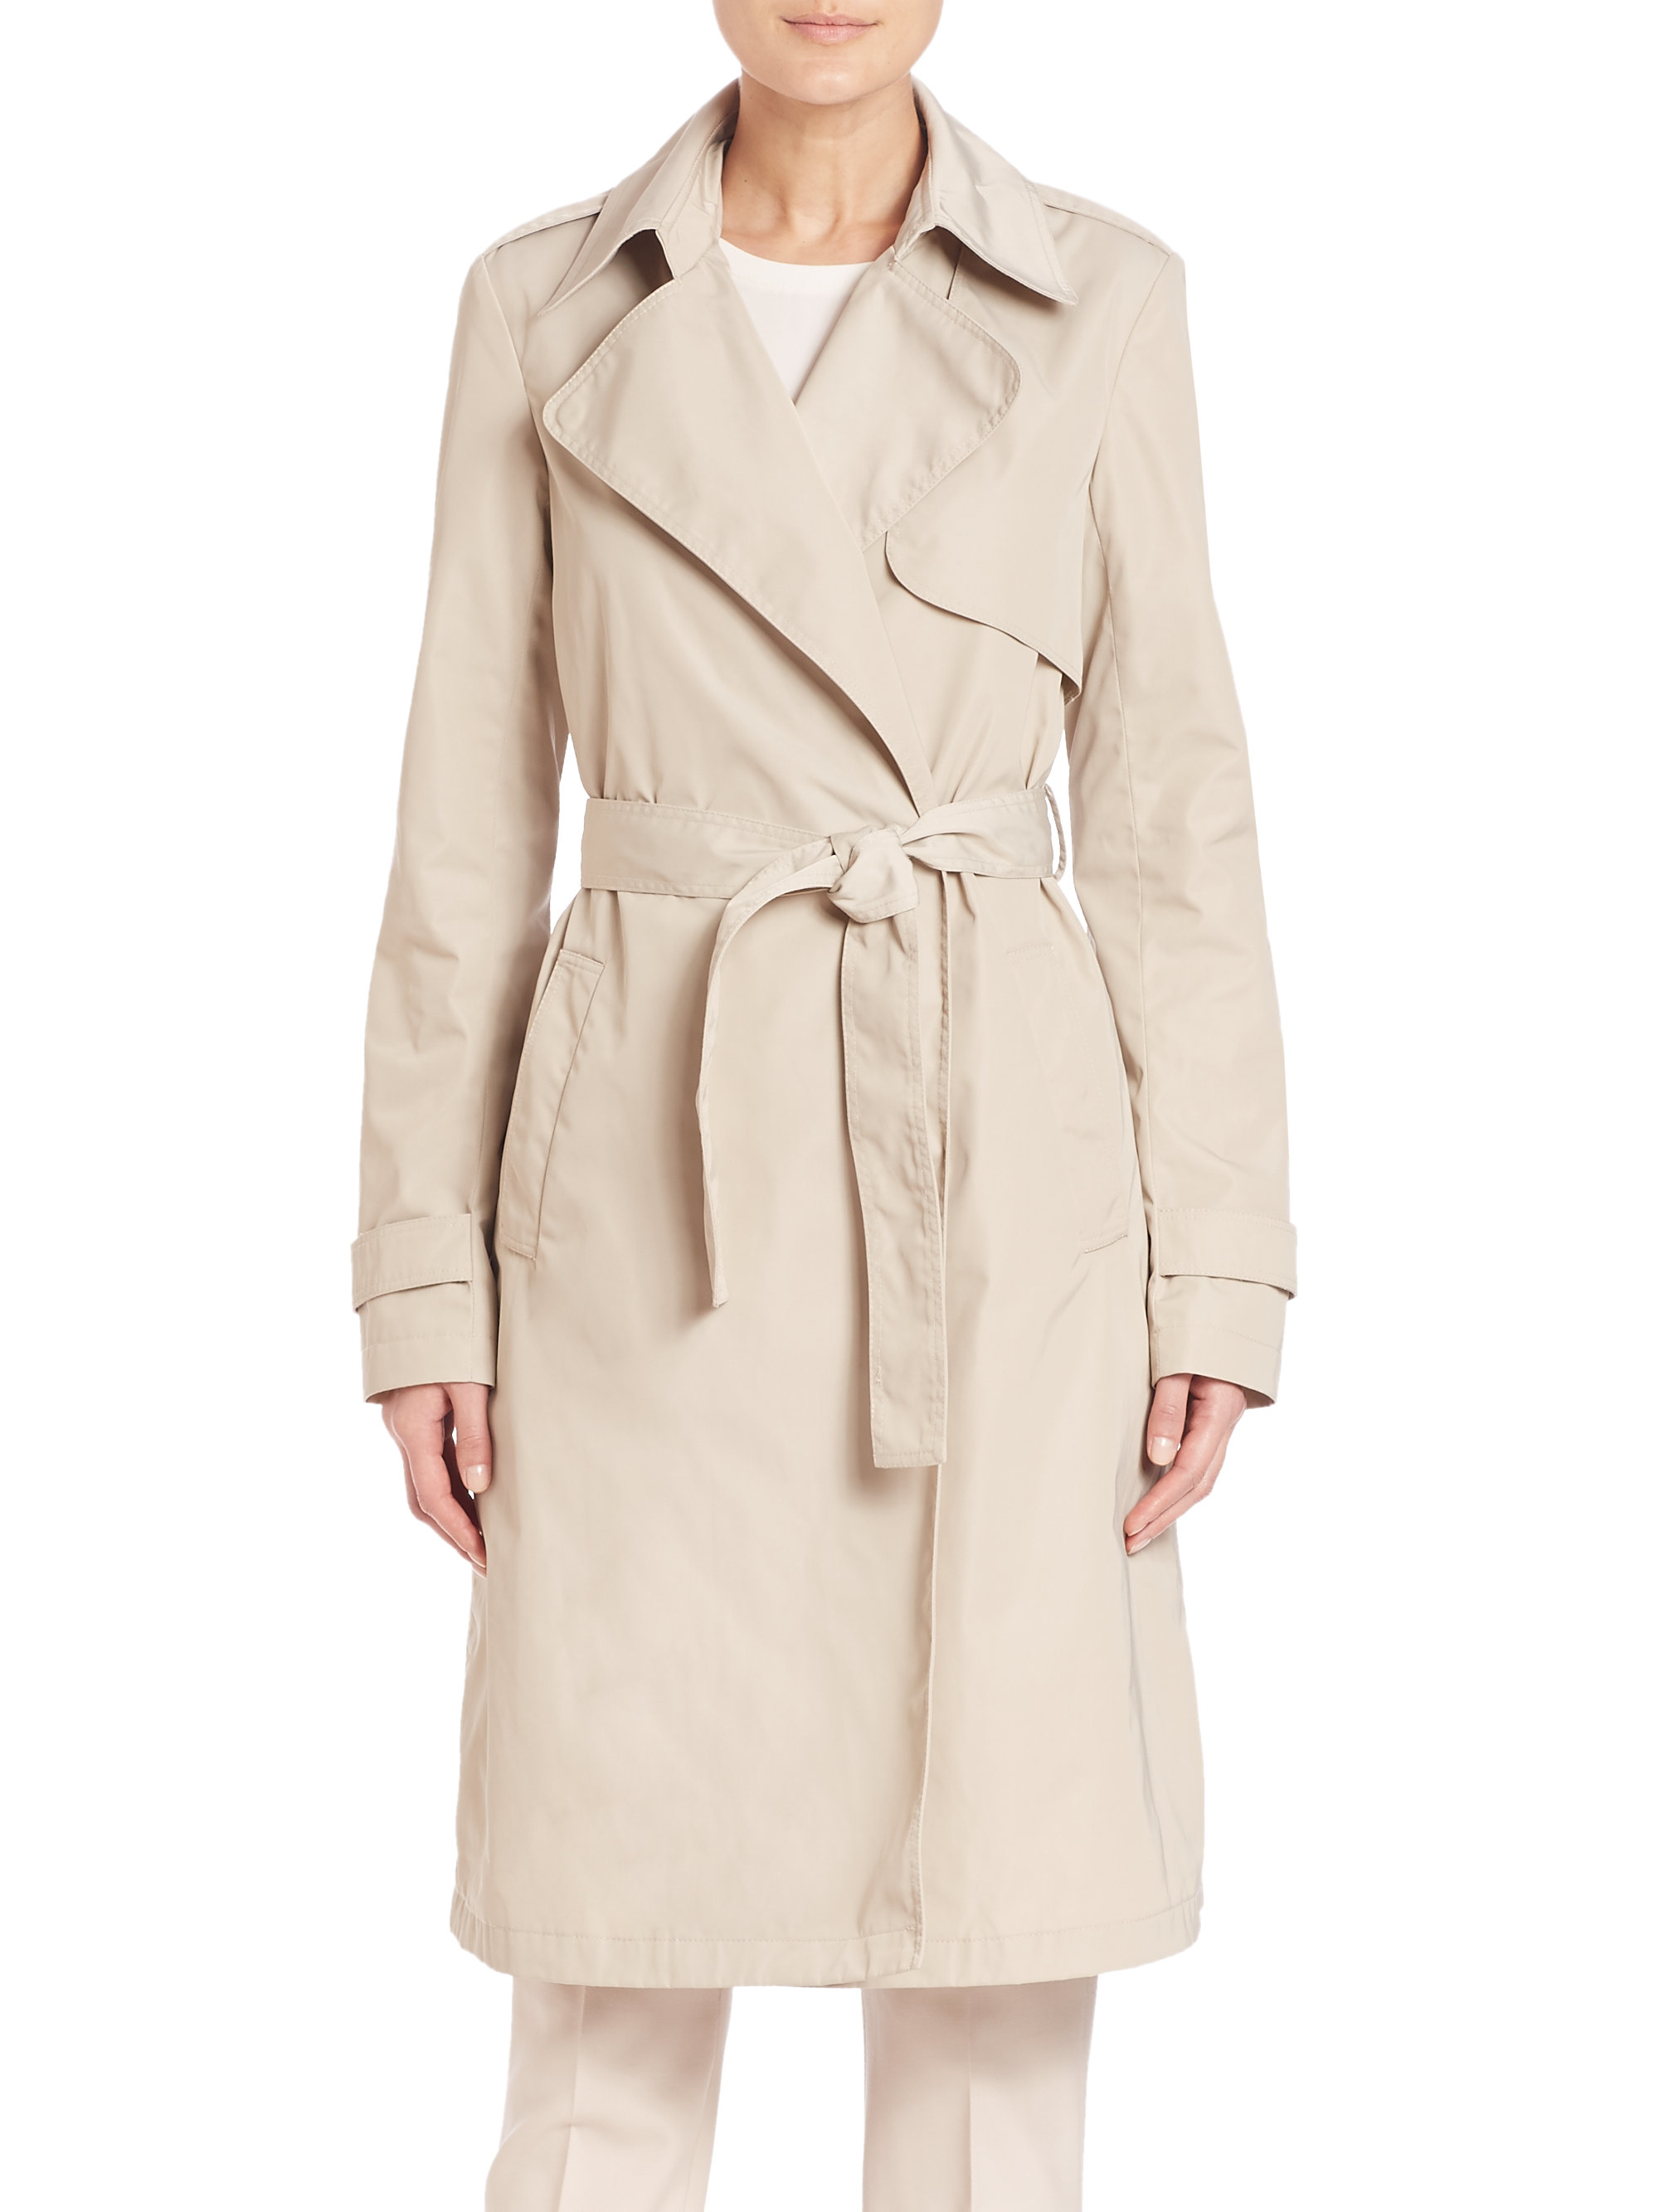 Lyst - Theory Oaklane Trenchcoat in Natural